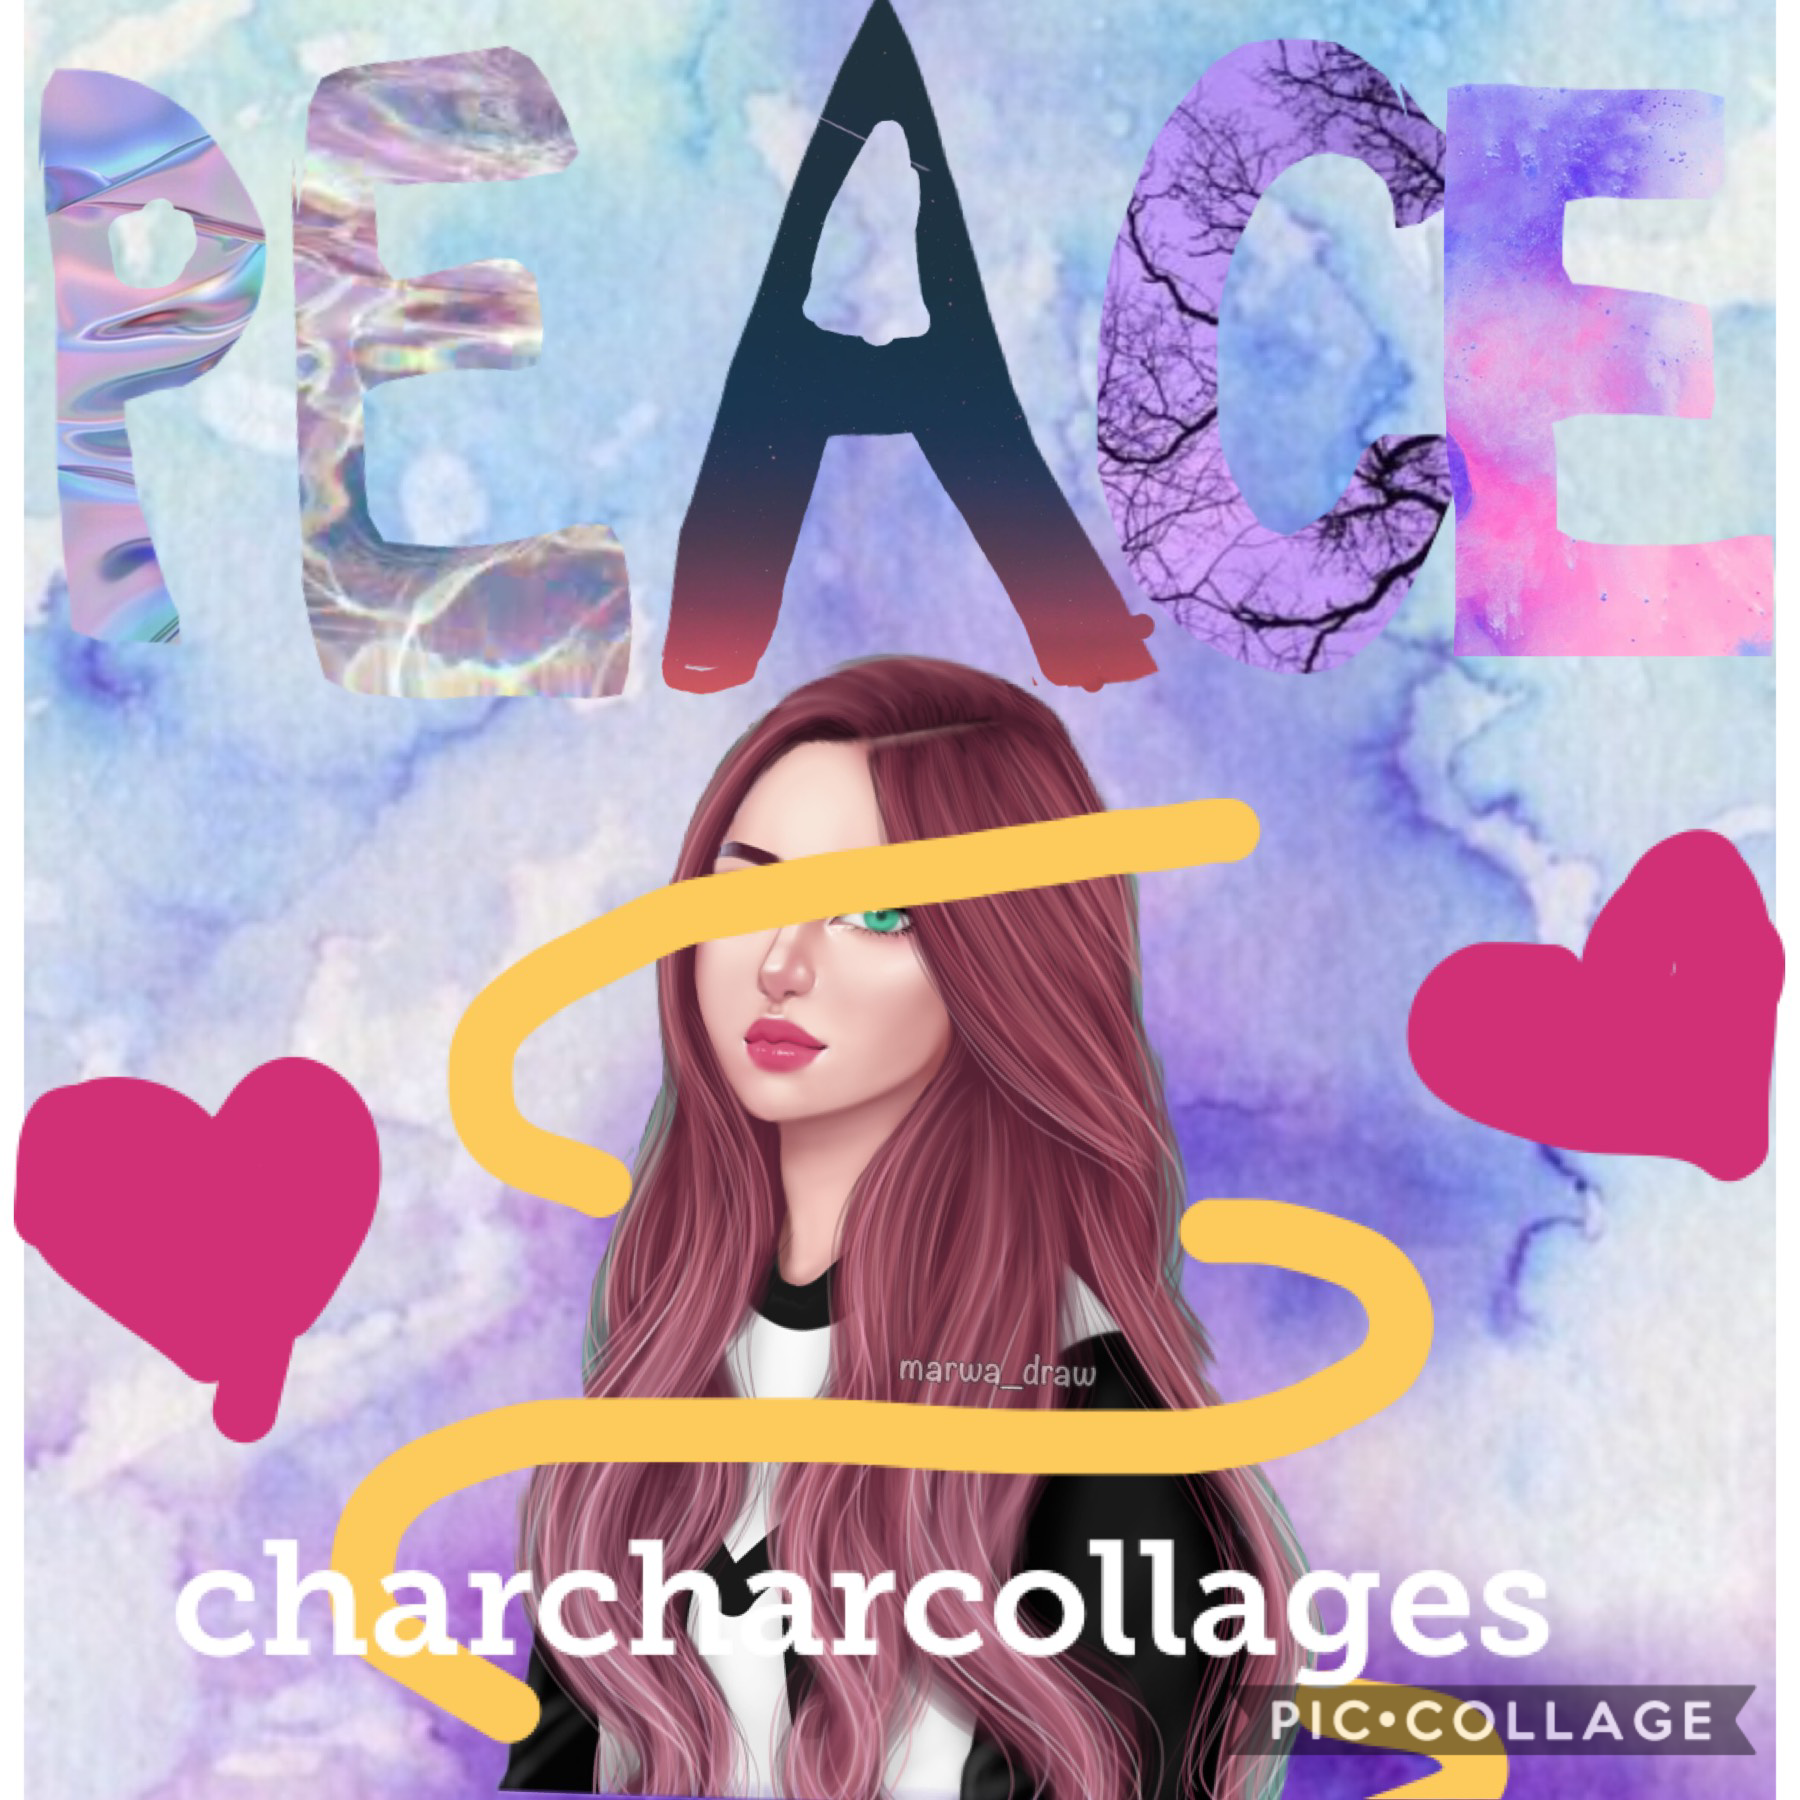 Collage by charcharcollages